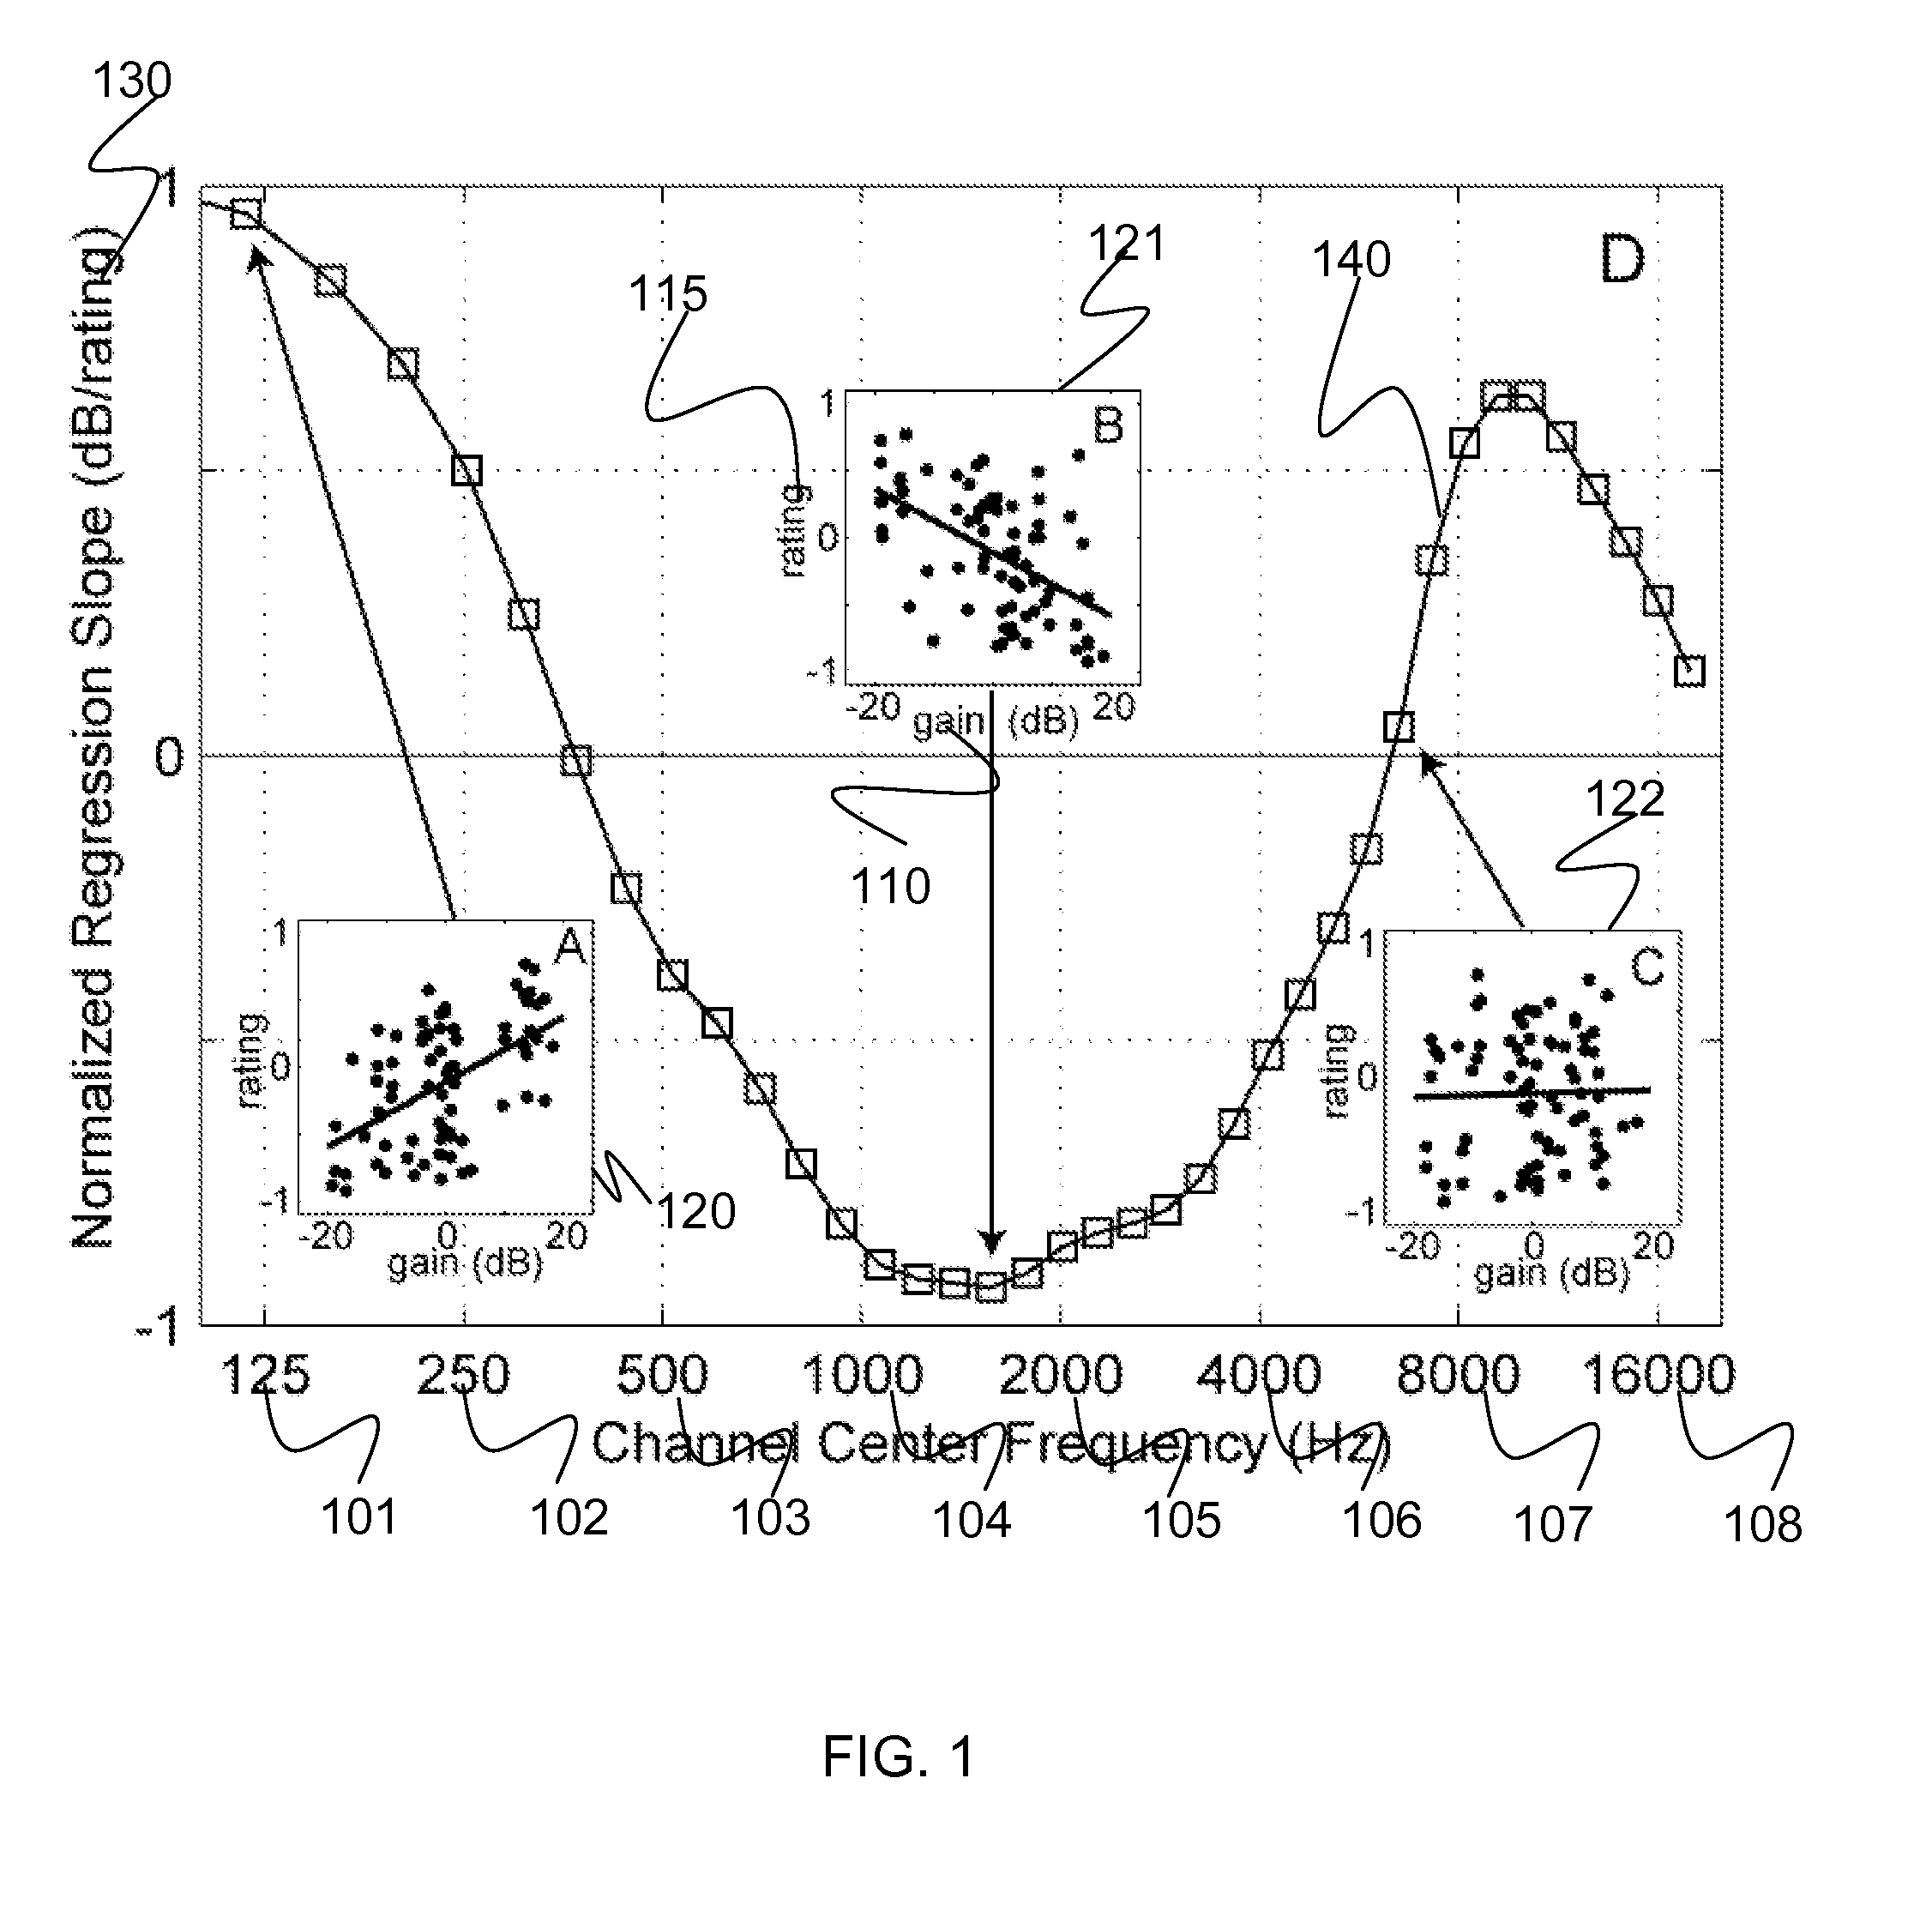 Systems, methods, and apparatus for equalization preference learning